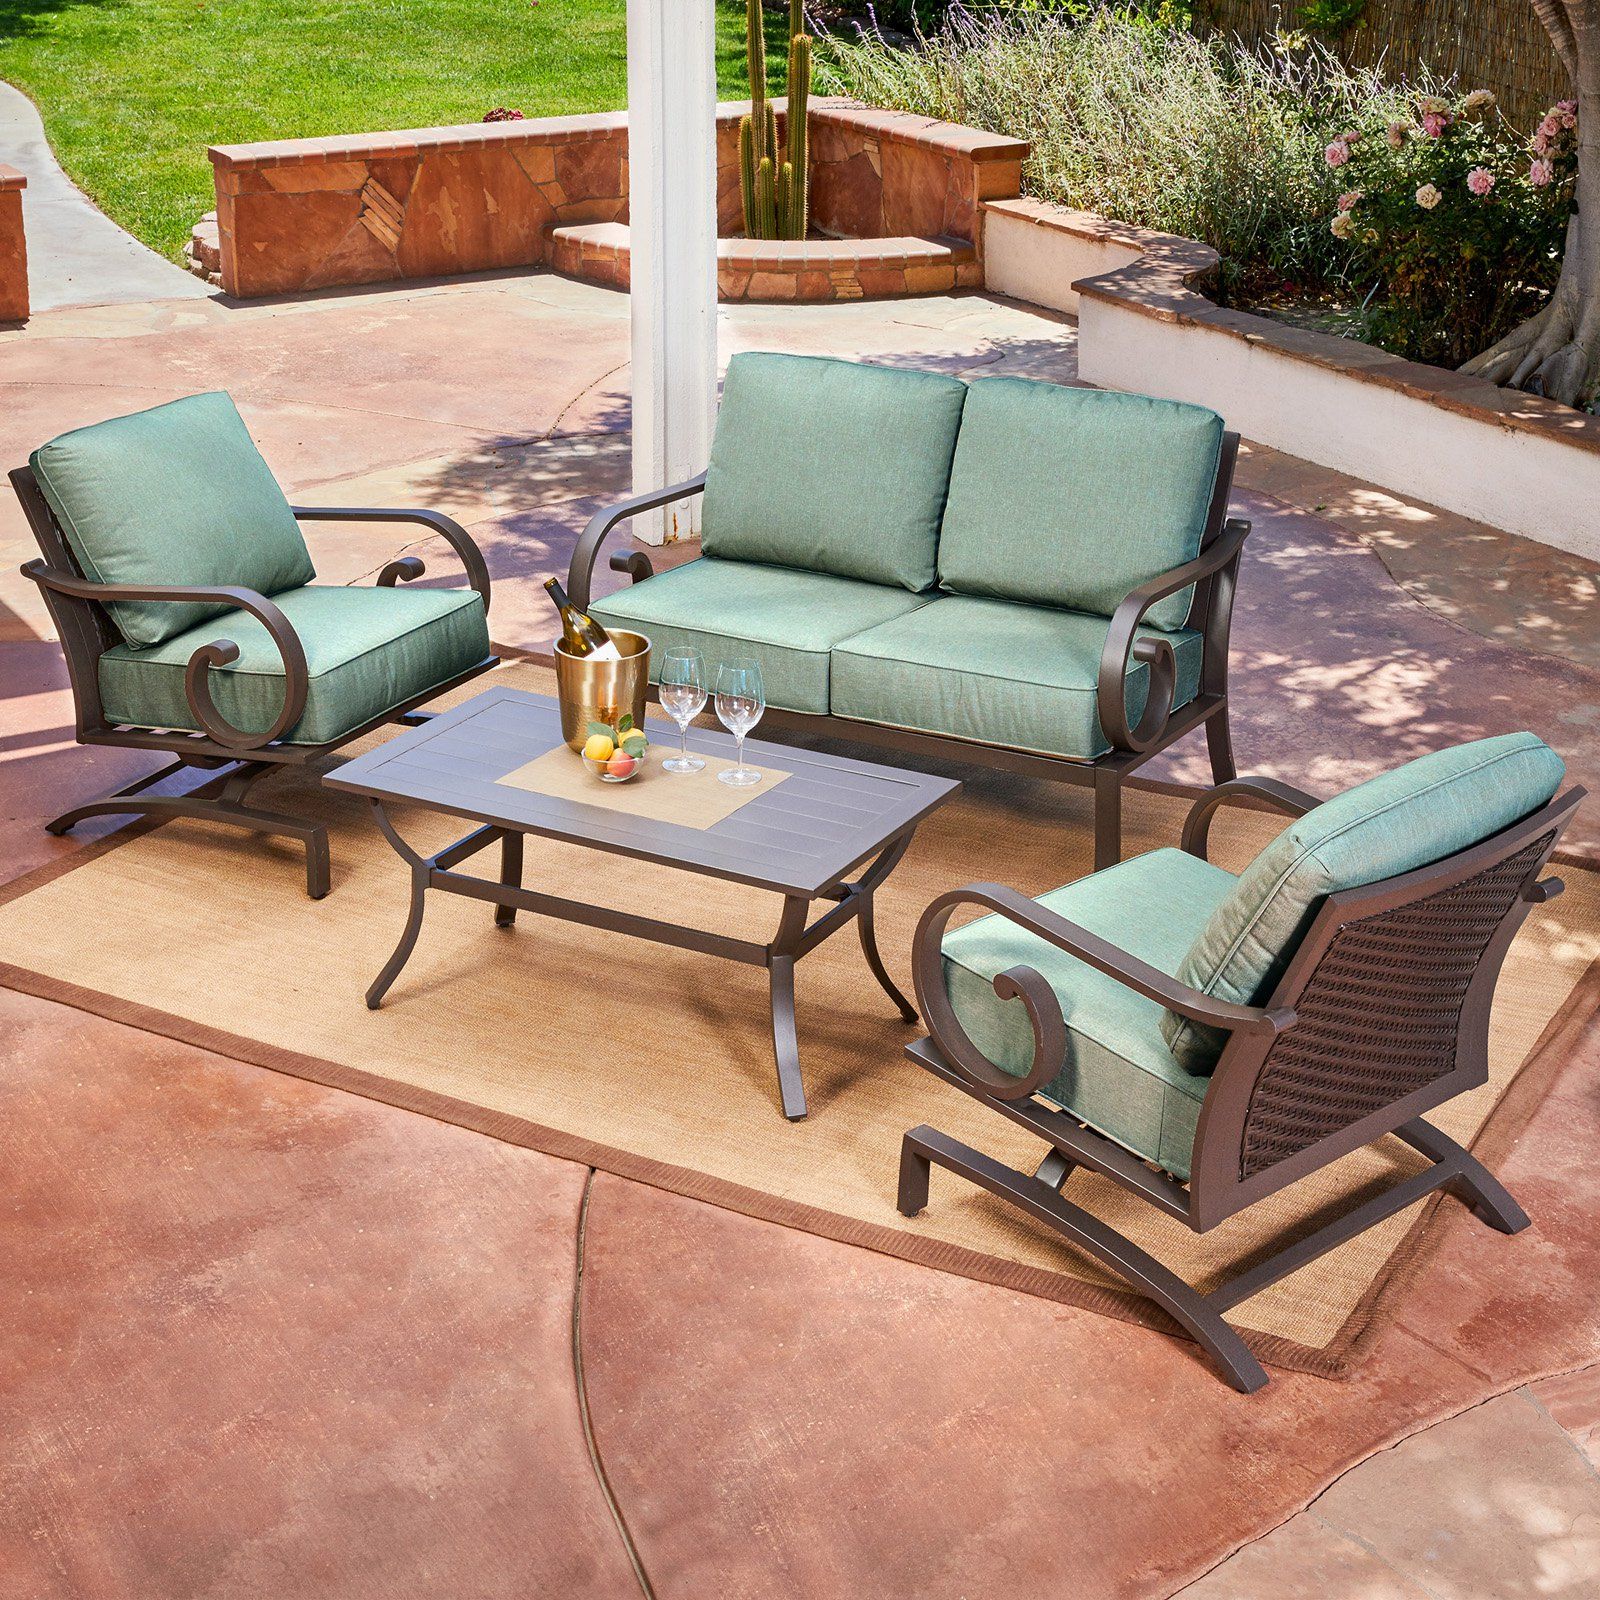 Most Recent Royal Garden Milano Aluminum 4 Piece Motion Patio Conversation Set For 4 Piece Outdoor Sectional Patio Sets (View 5 of 15)